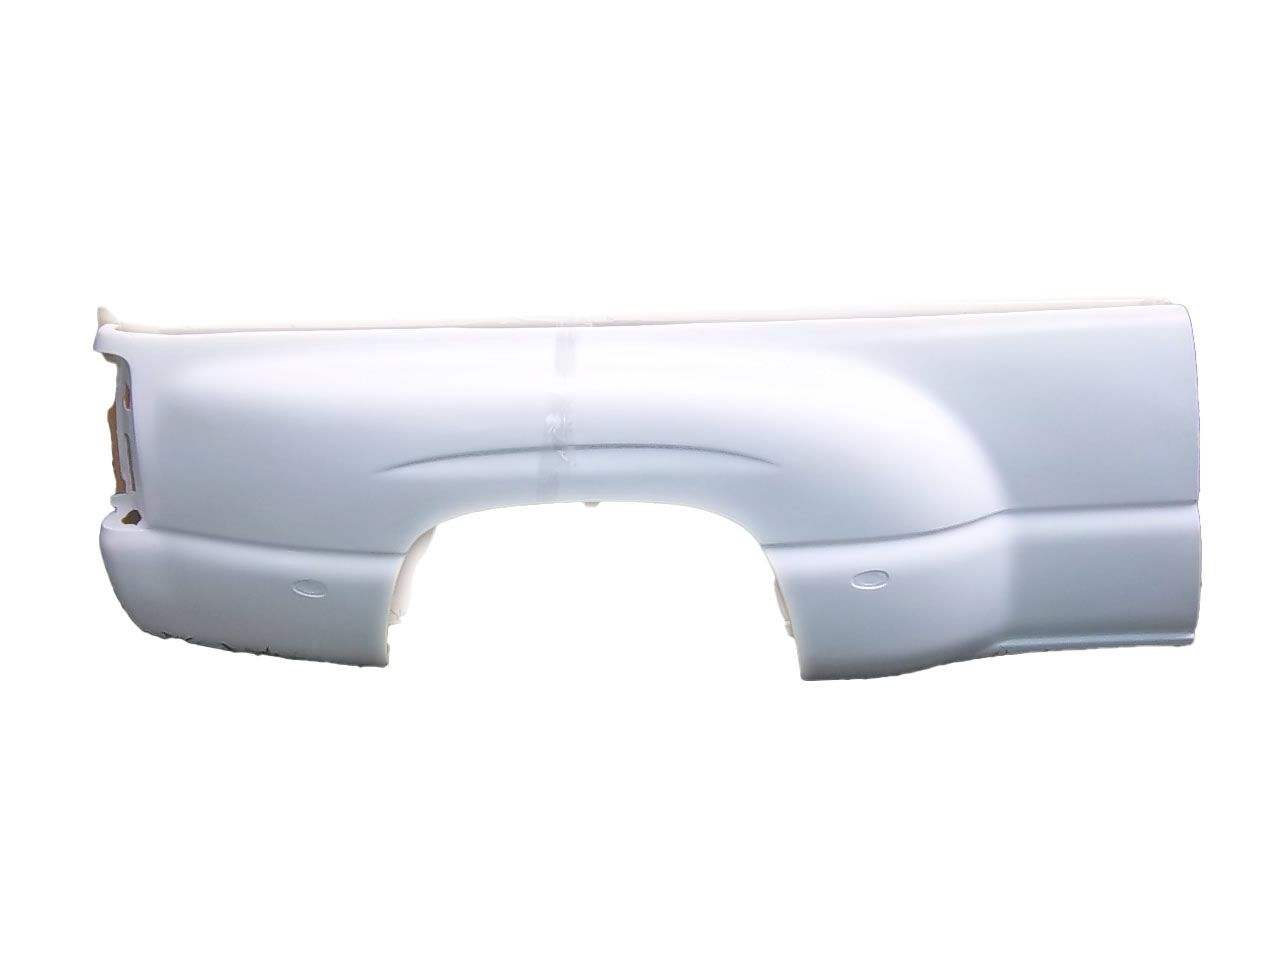 chevy/gmc 3500 dually rear fenders 2000-2007 oem replacement perfect fit .